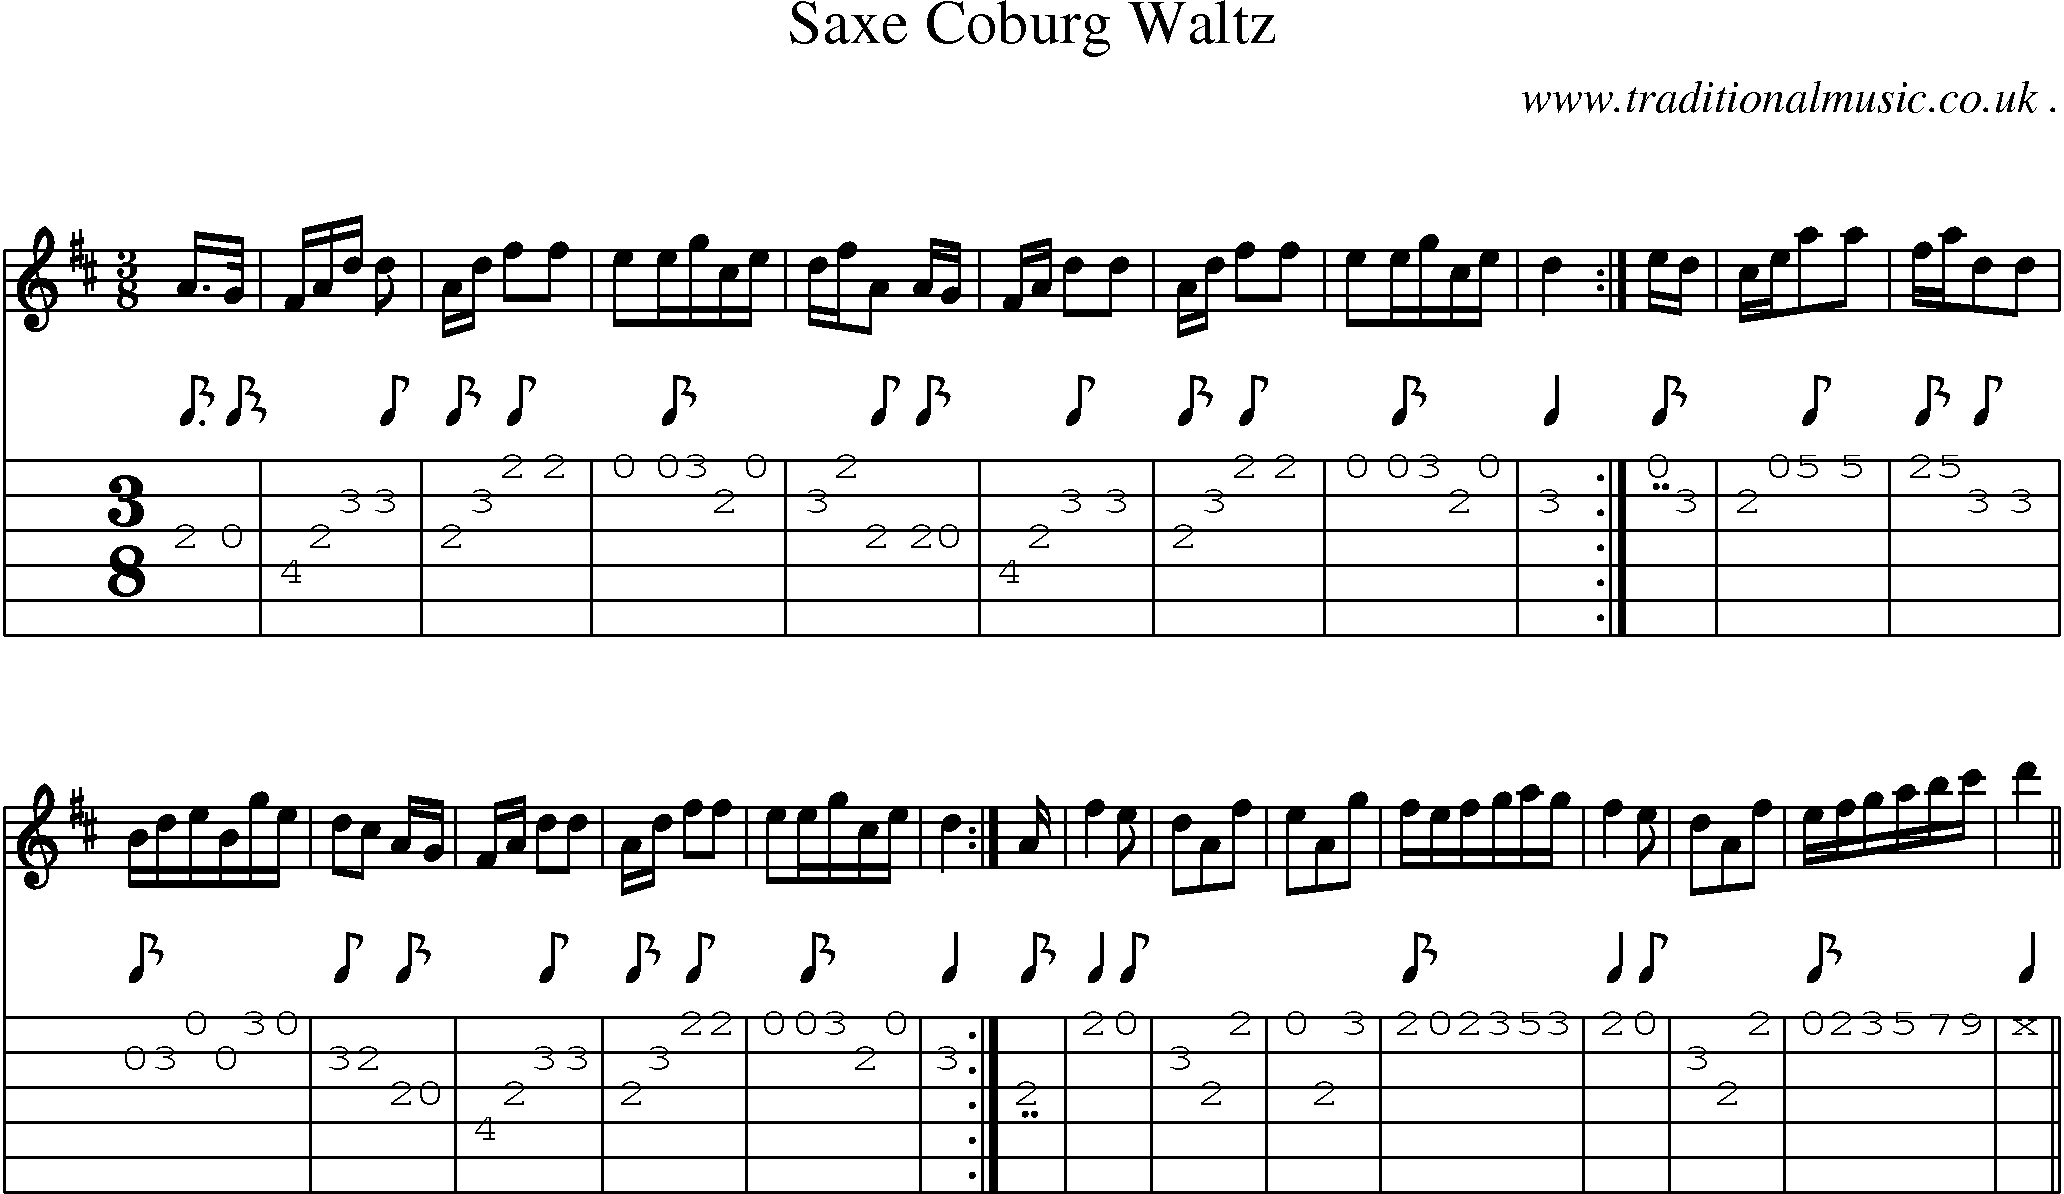 Sheet-Music and Guitar Tabs for Saxe Coburg Waltz